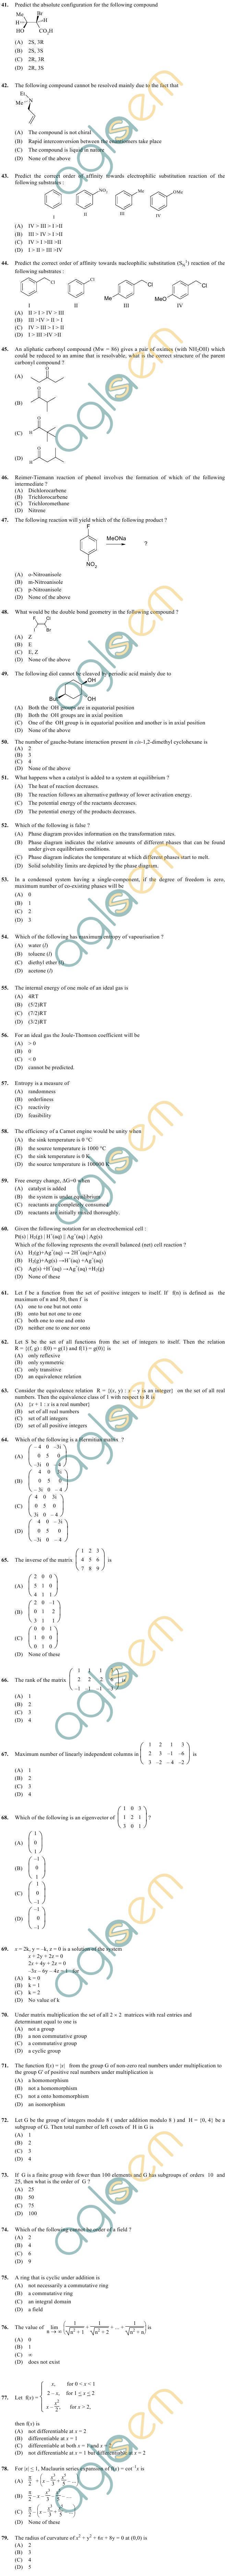 OJEE 2013 Question Paper for LE PHARMACY